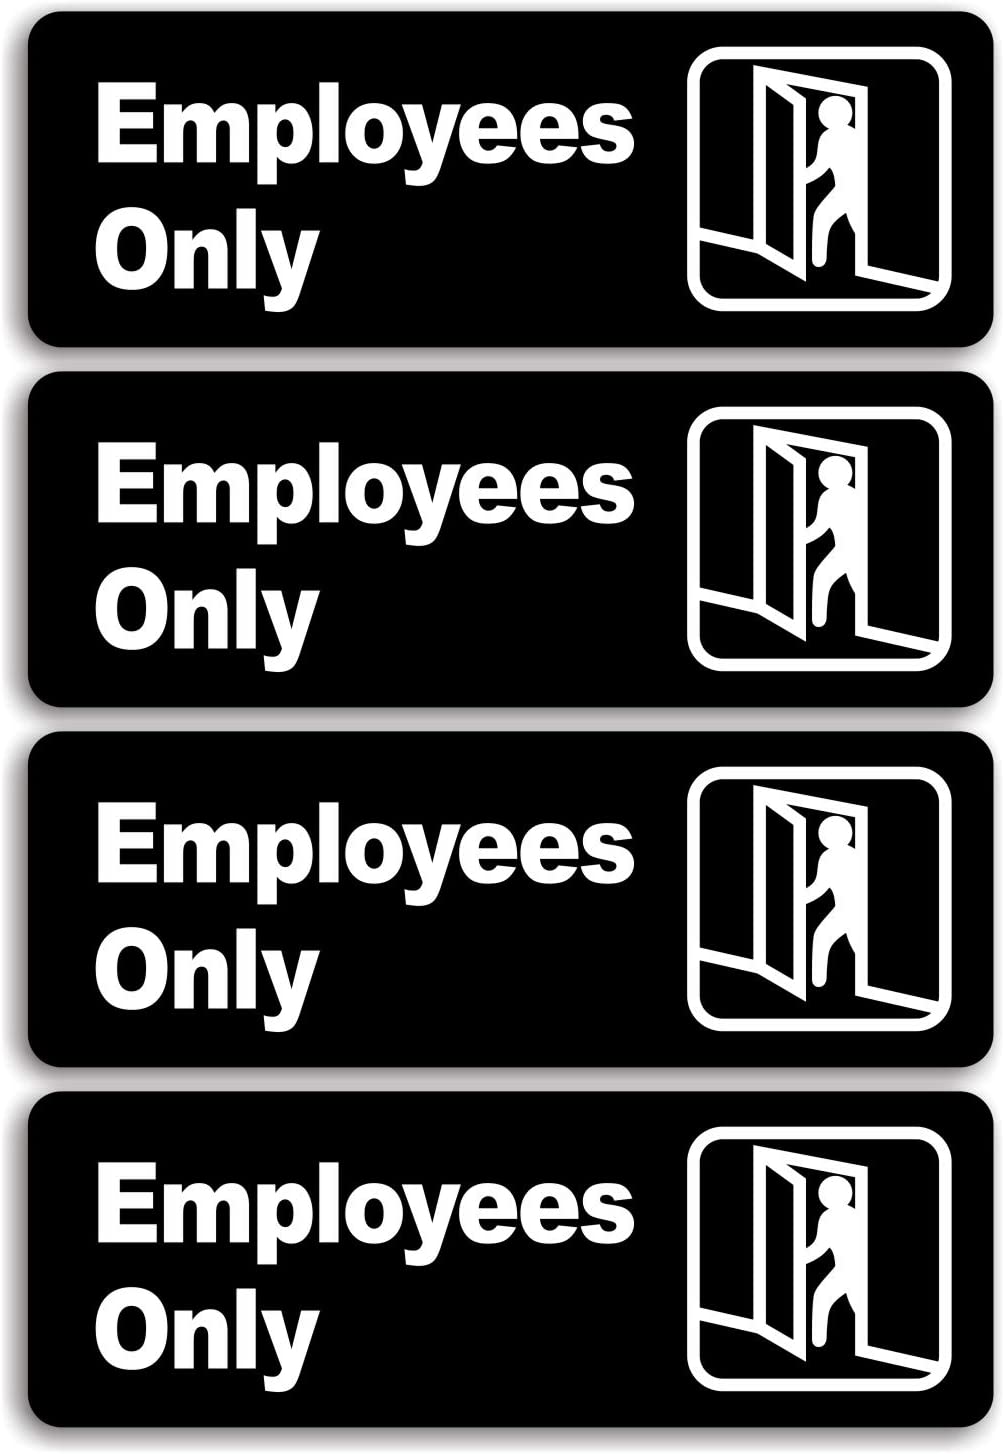 "Employee Only" Informative Acrylic Plastic Sign with Symbols, (4 Pack) 9 X 3 Inch, Self Adhesive, Use for Office/Business, Easy to Apply, White Big Letters on Black Plate